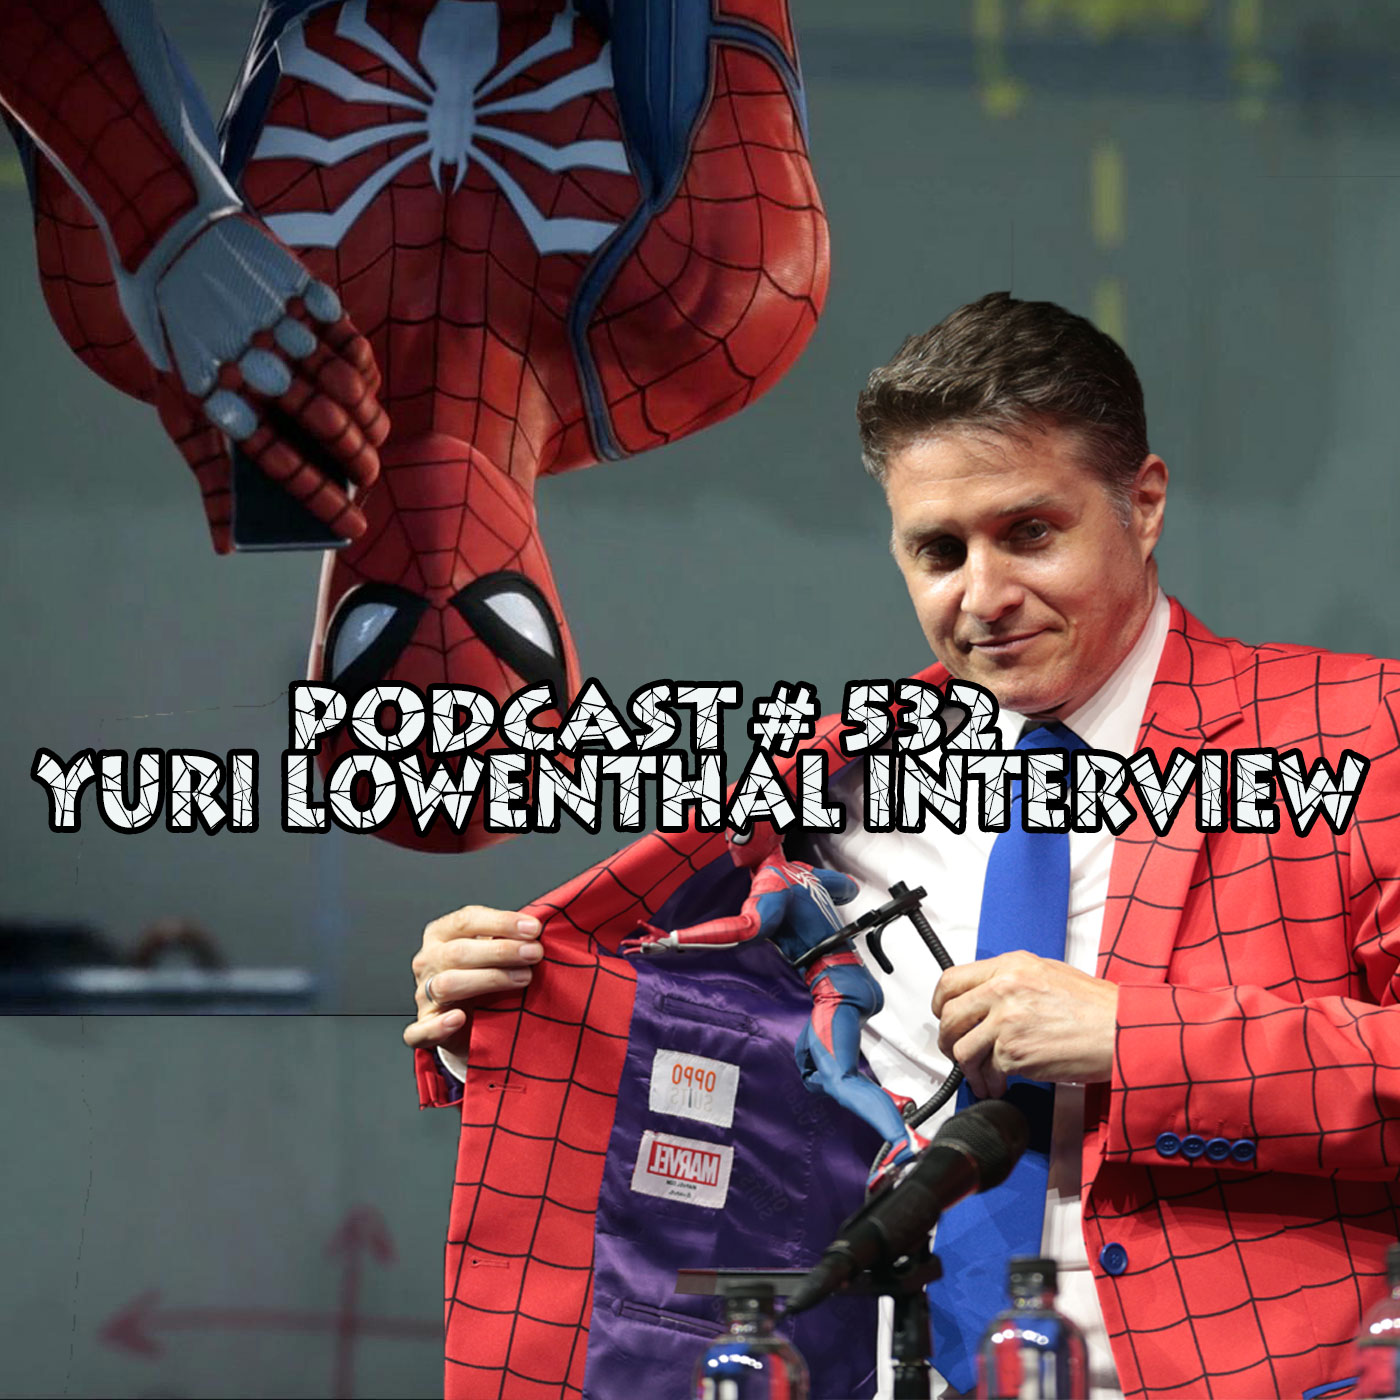 How Marvel's Spider-Man 2's Yuri Lowenthal Unleashed Peter's Dark Side